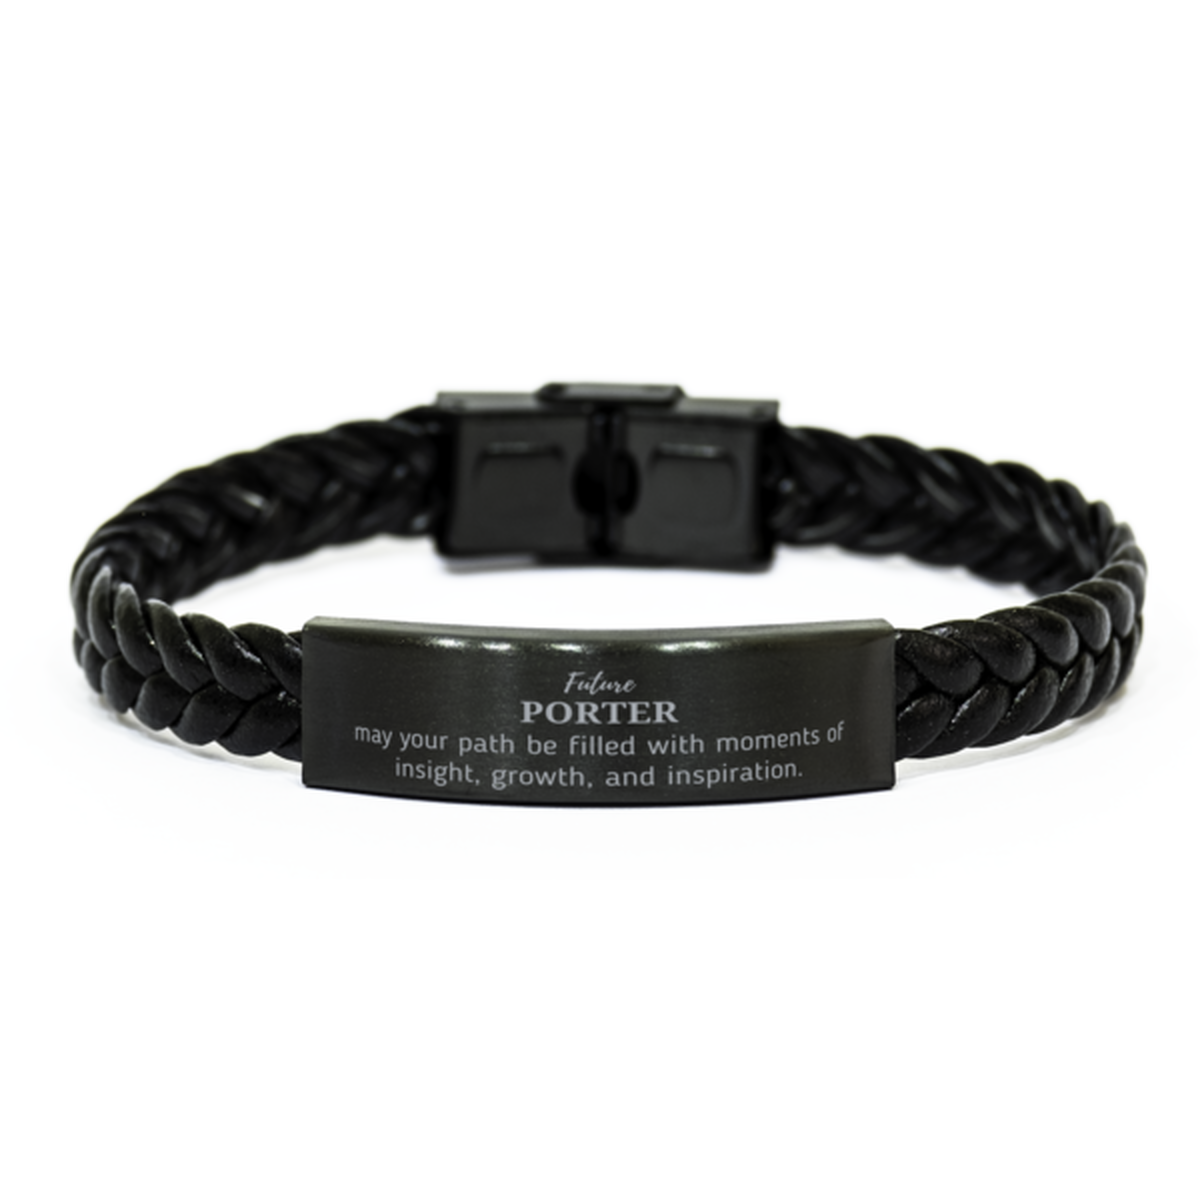 Future Porter Gifts, May your path be filled with moments of insight, Graduation Gifts for New Porter, Christmas Unique Braided Leather Bracelet For Men, Women, Friends